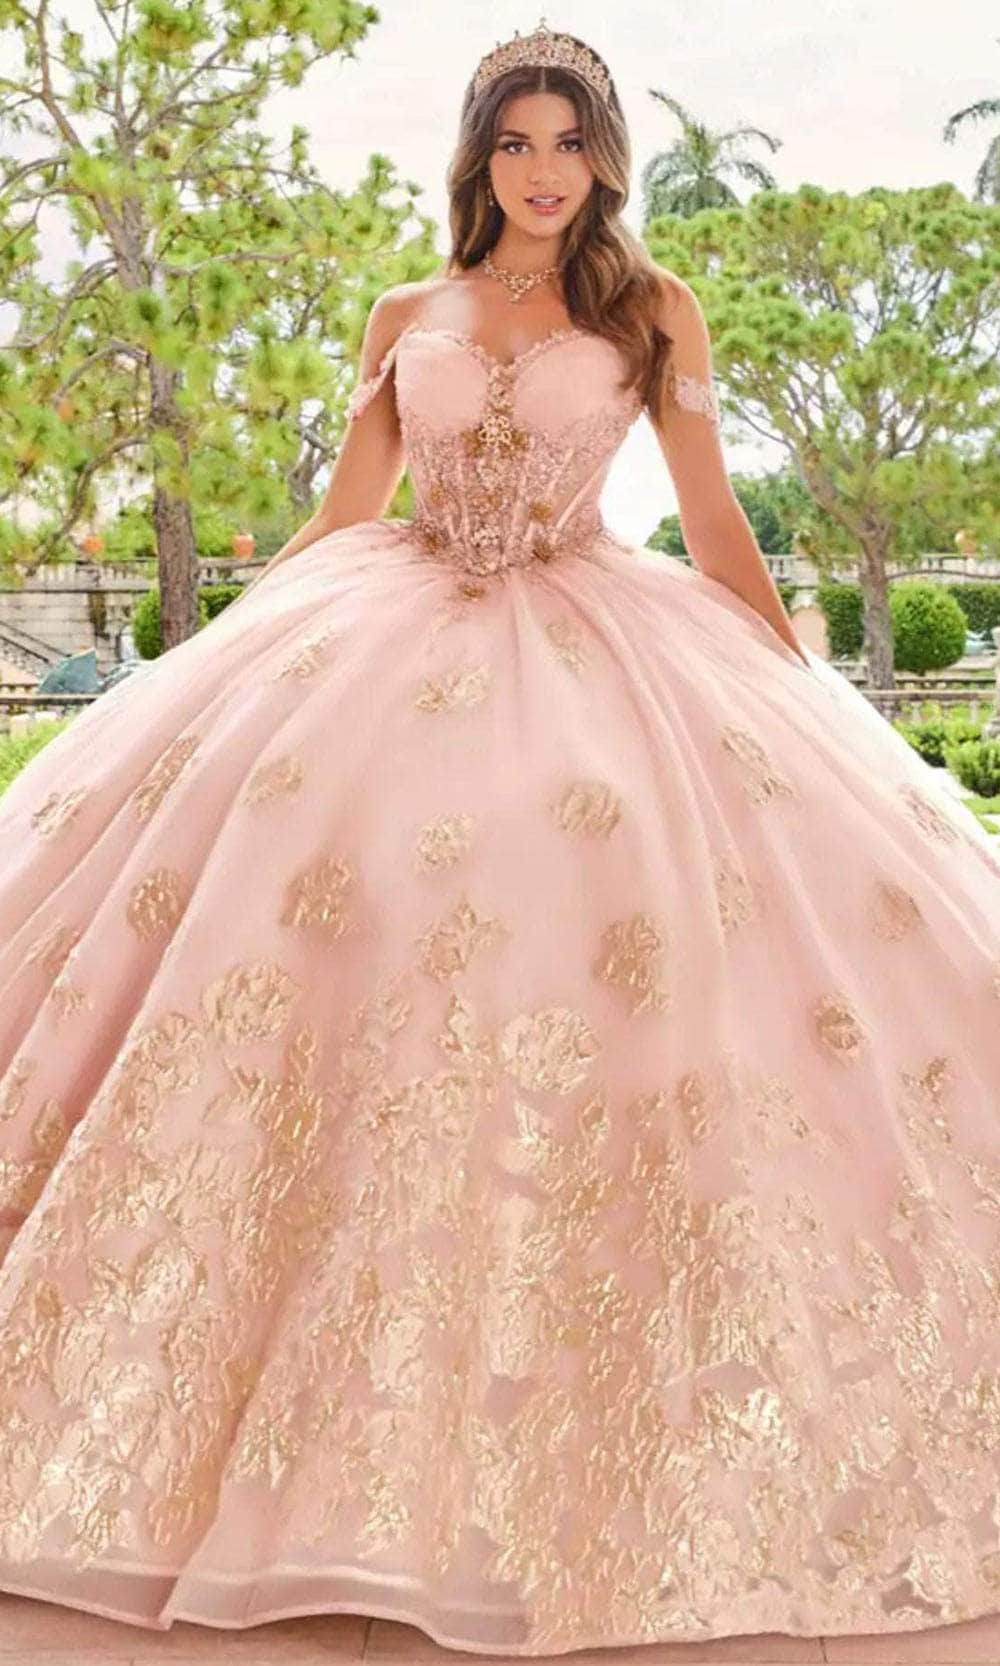 Princesa by Ariana Vara PR30154 - Lace-Up Tie Prom Gown
